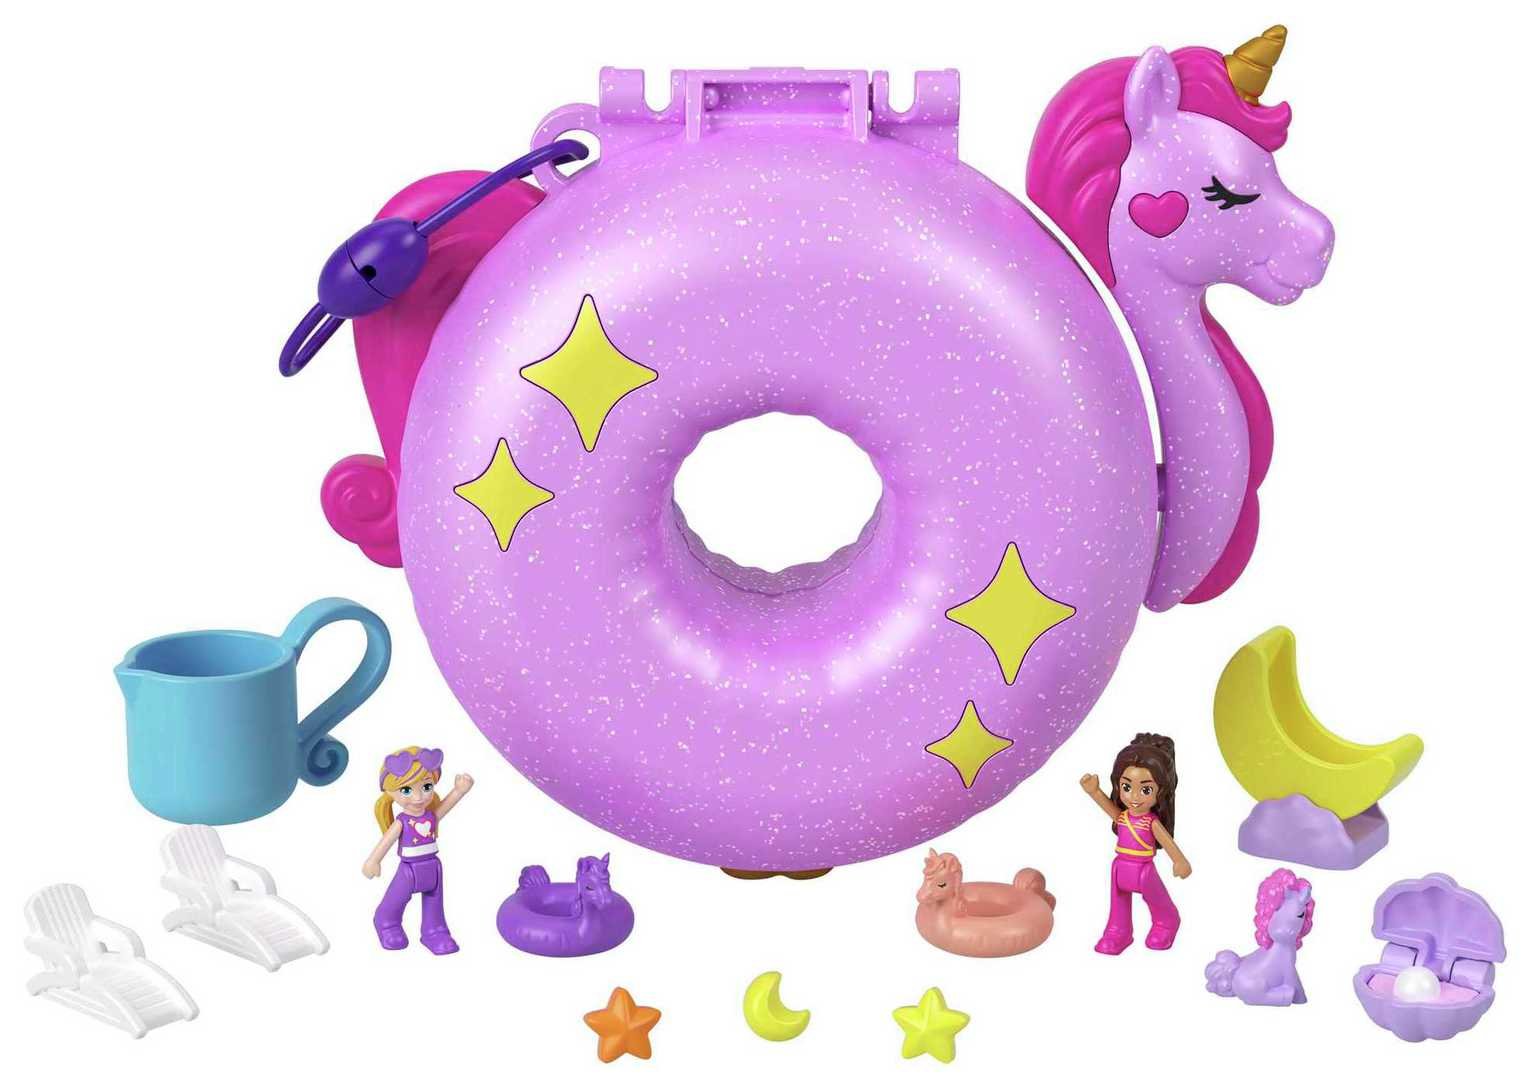 Polly Pocket Unicorn Floatie Compact Micro Doll Playset